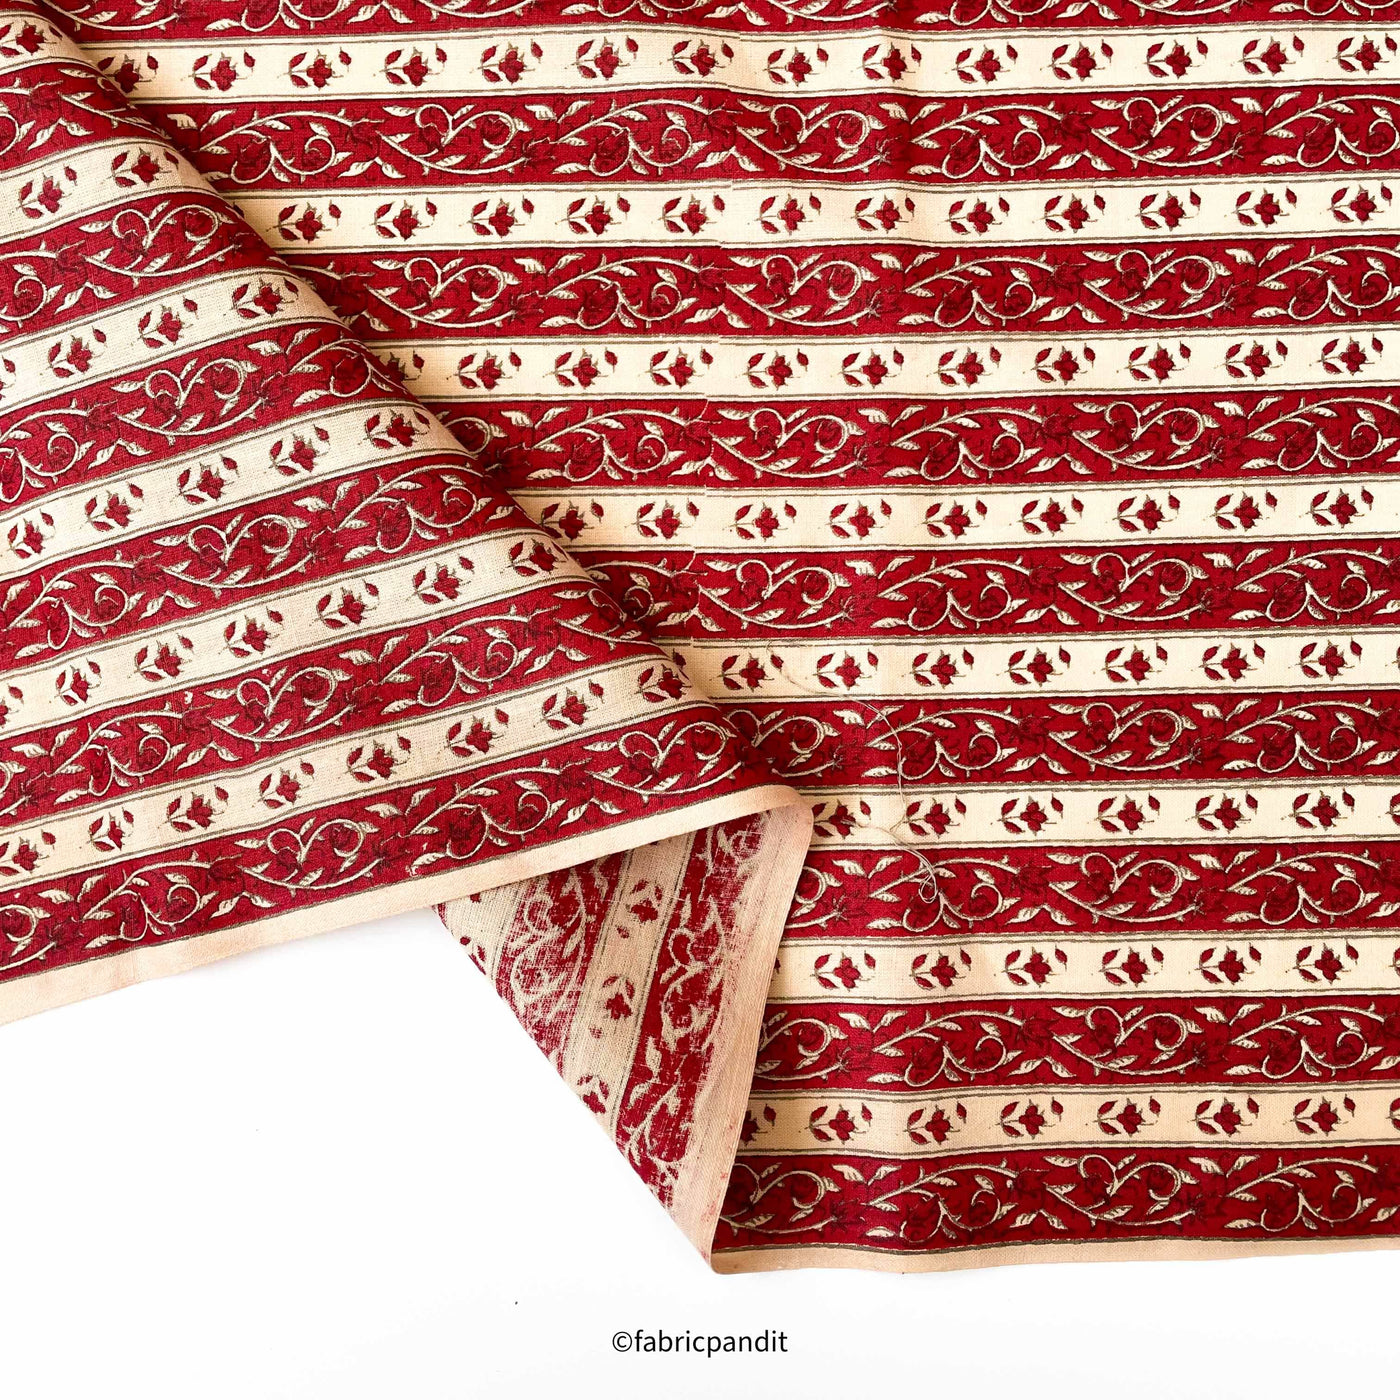 Hand Block Printed Cotton Fabric Cut Piece (CUT PIECE) Deep Red & Off-White Mughal Floral Stripes Hand Block Printed Pure Cotton Fabric (Width 42 inches)